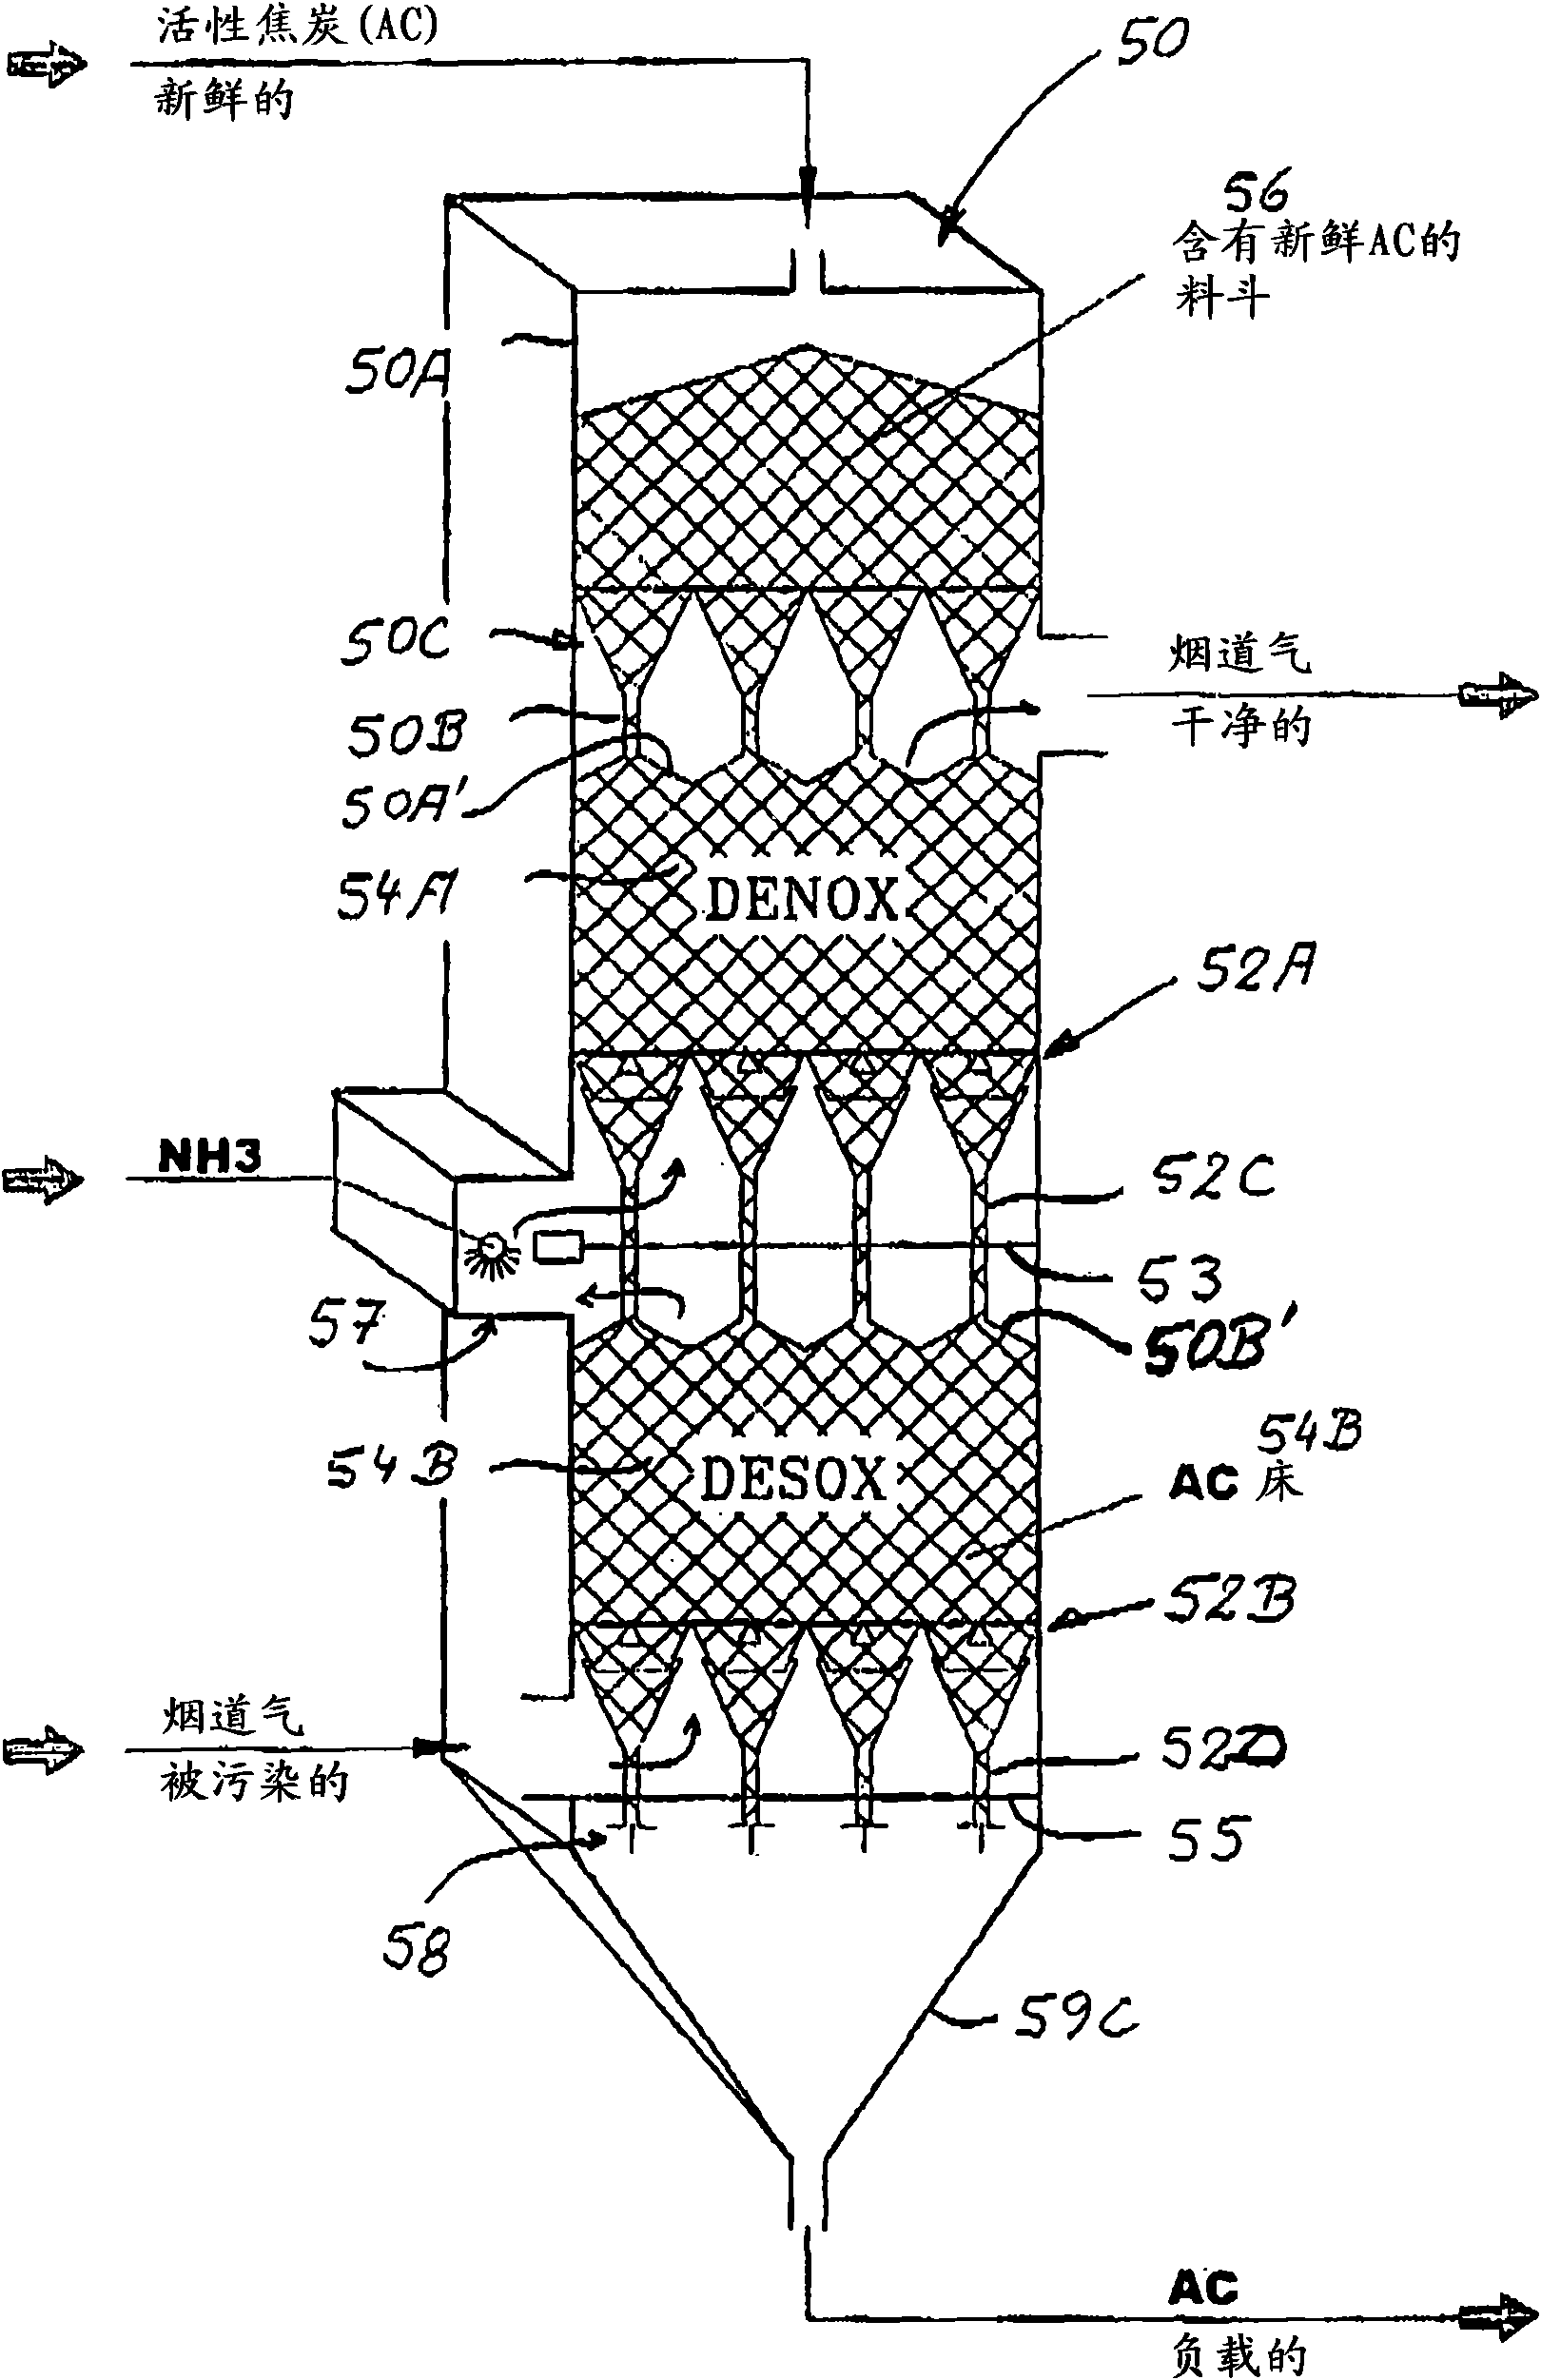 Method and device for purifying the flue gases of a sintering process of ores and/or other material-containing materials in metal production